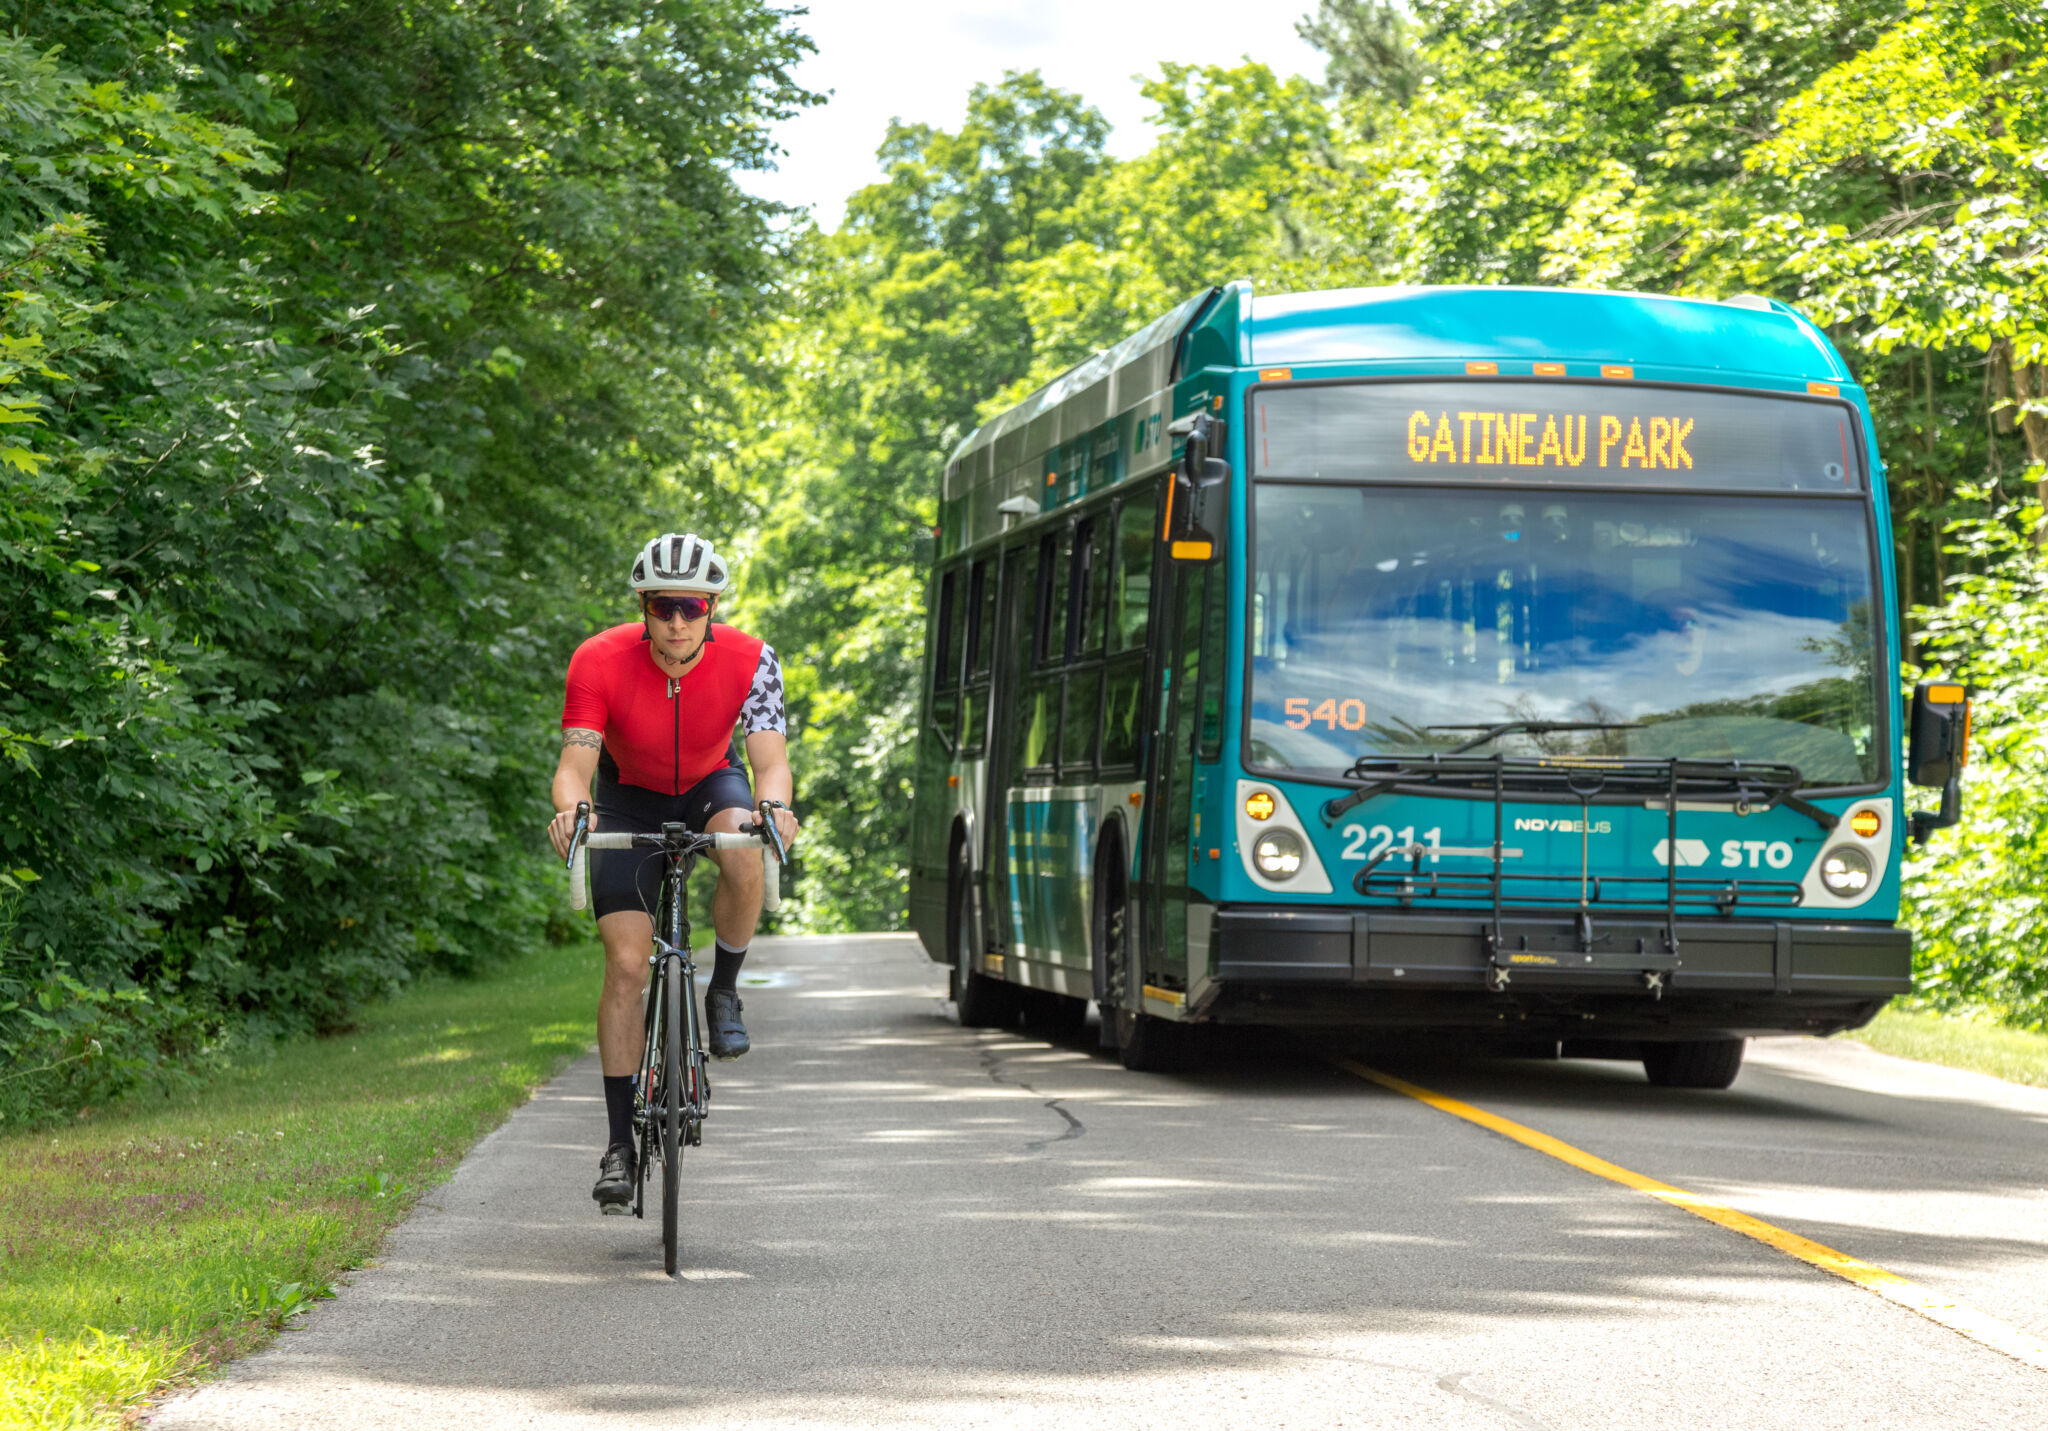 Cyclist being passed by the Gatineau Park shuttle on a narrow parkway.